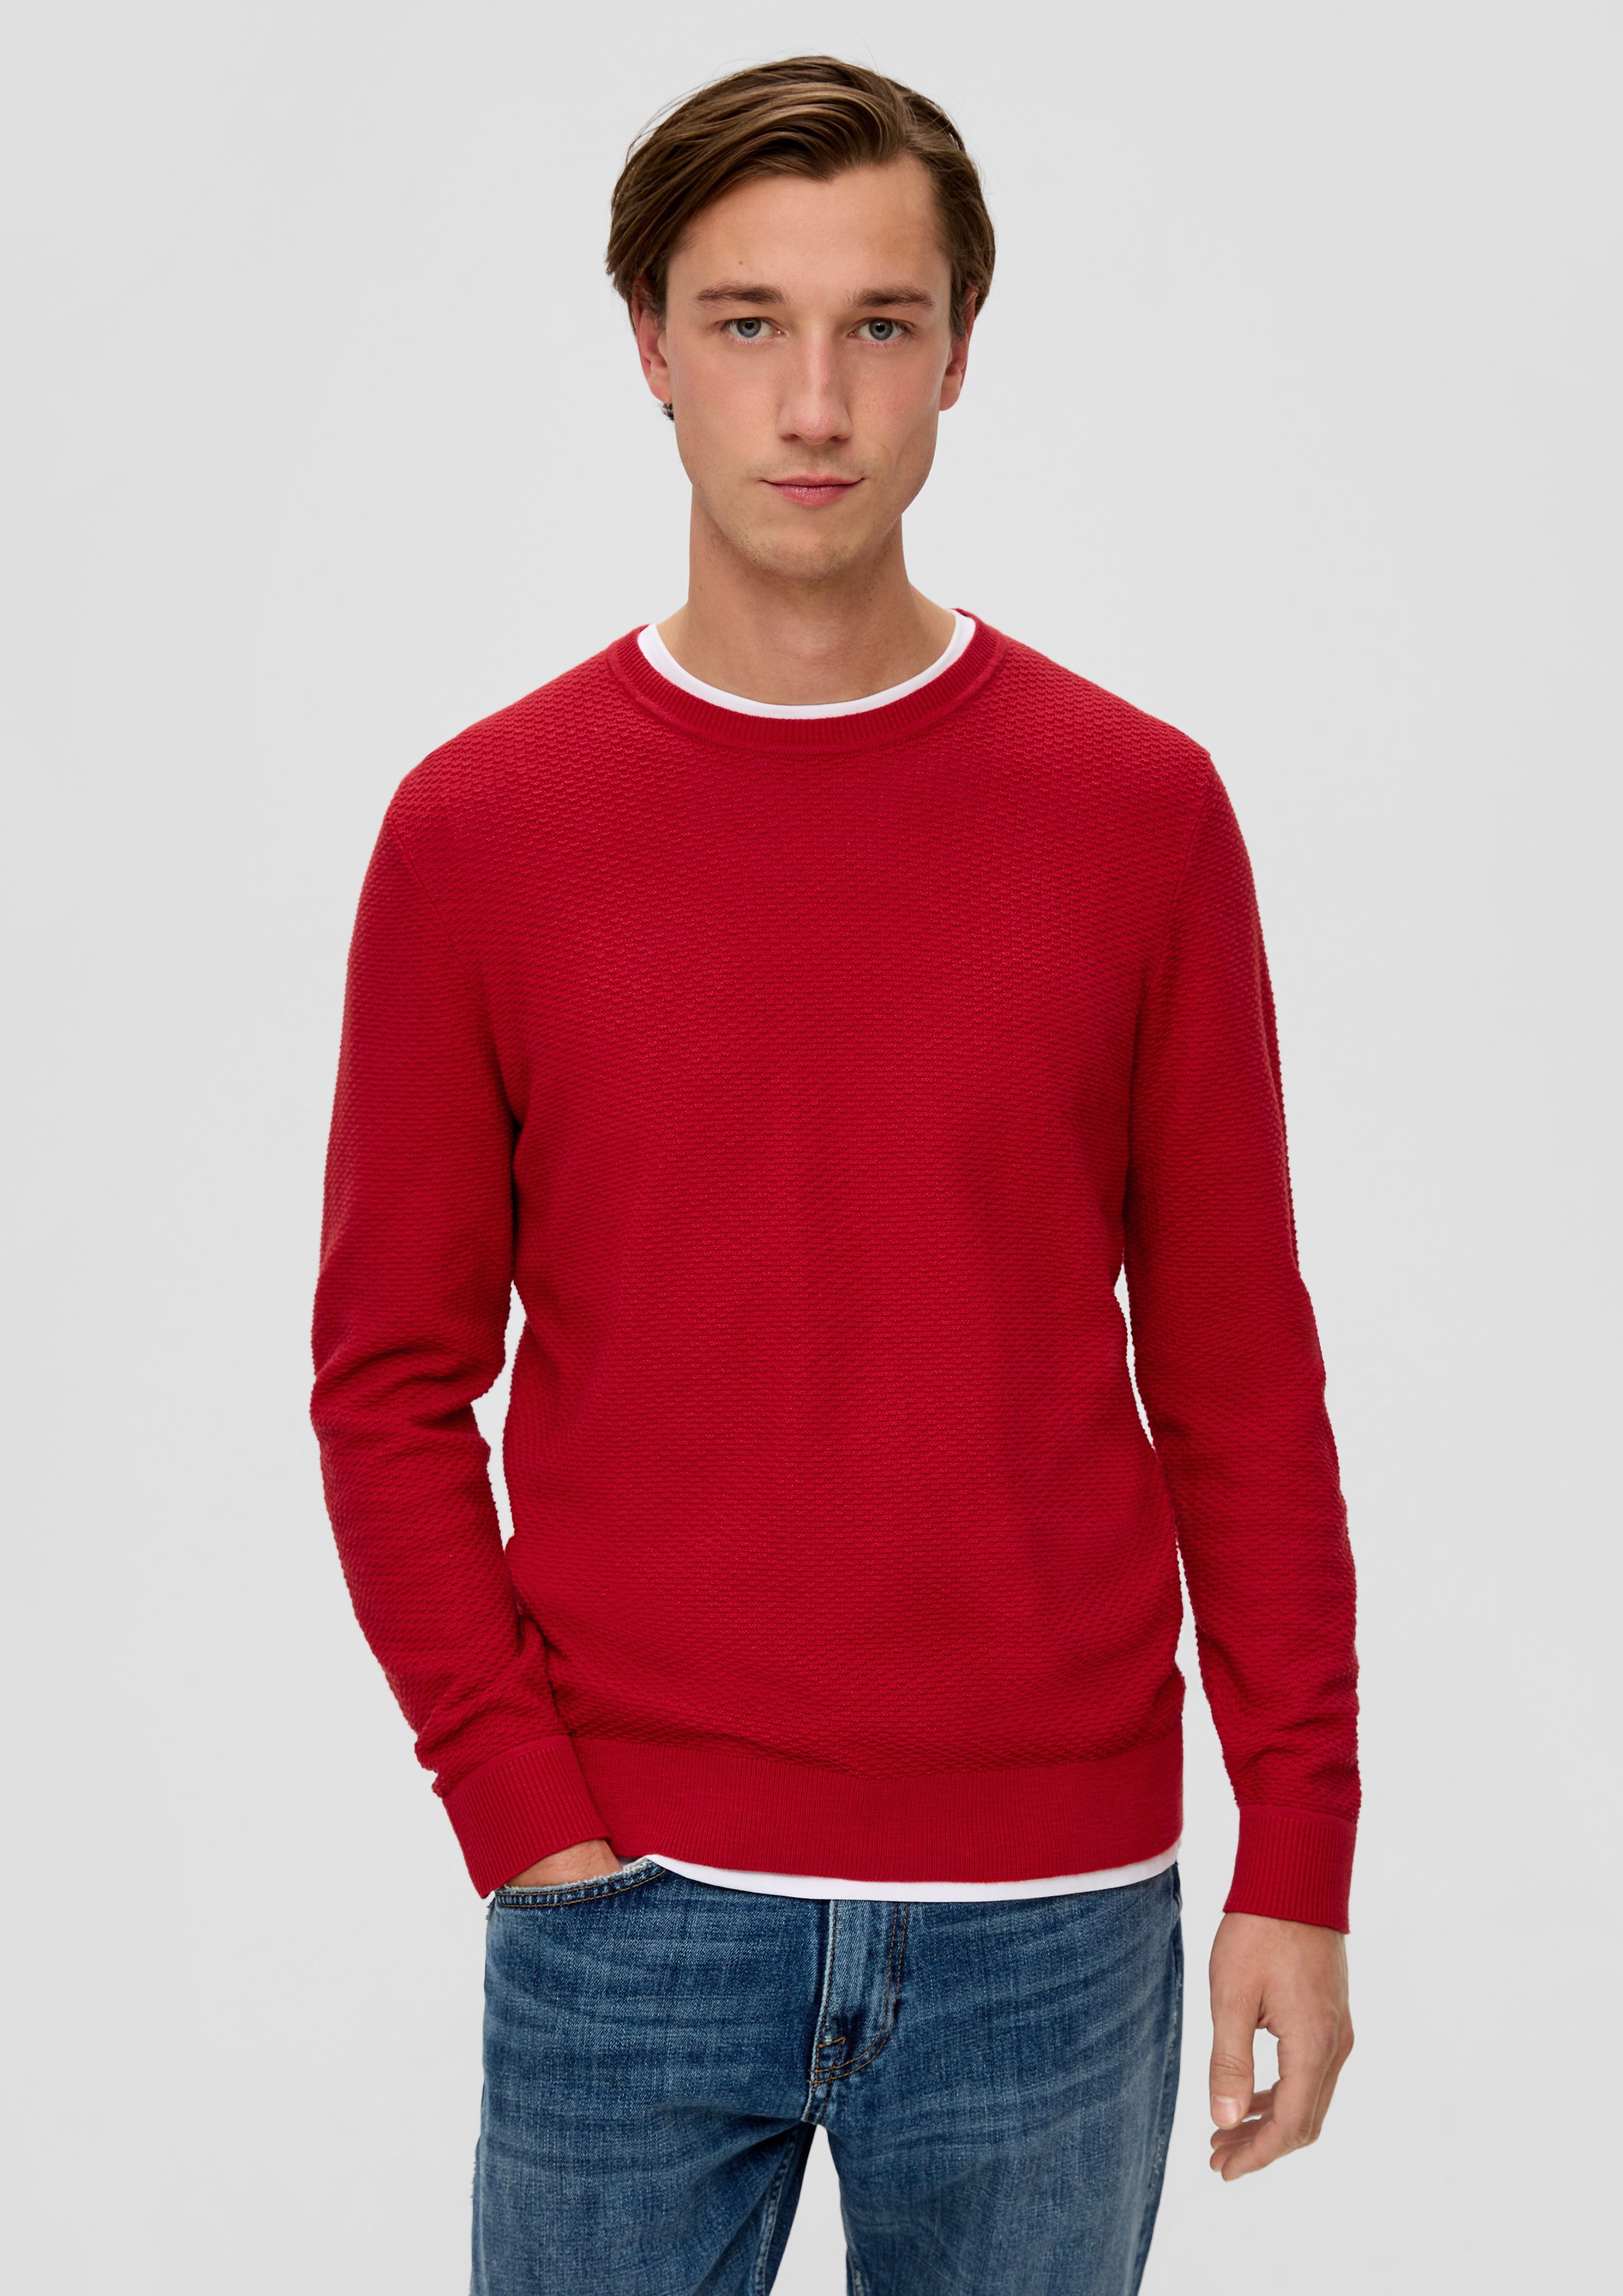 s.Oliver Strickpullover Pullover aus Baumwolle mohnrot